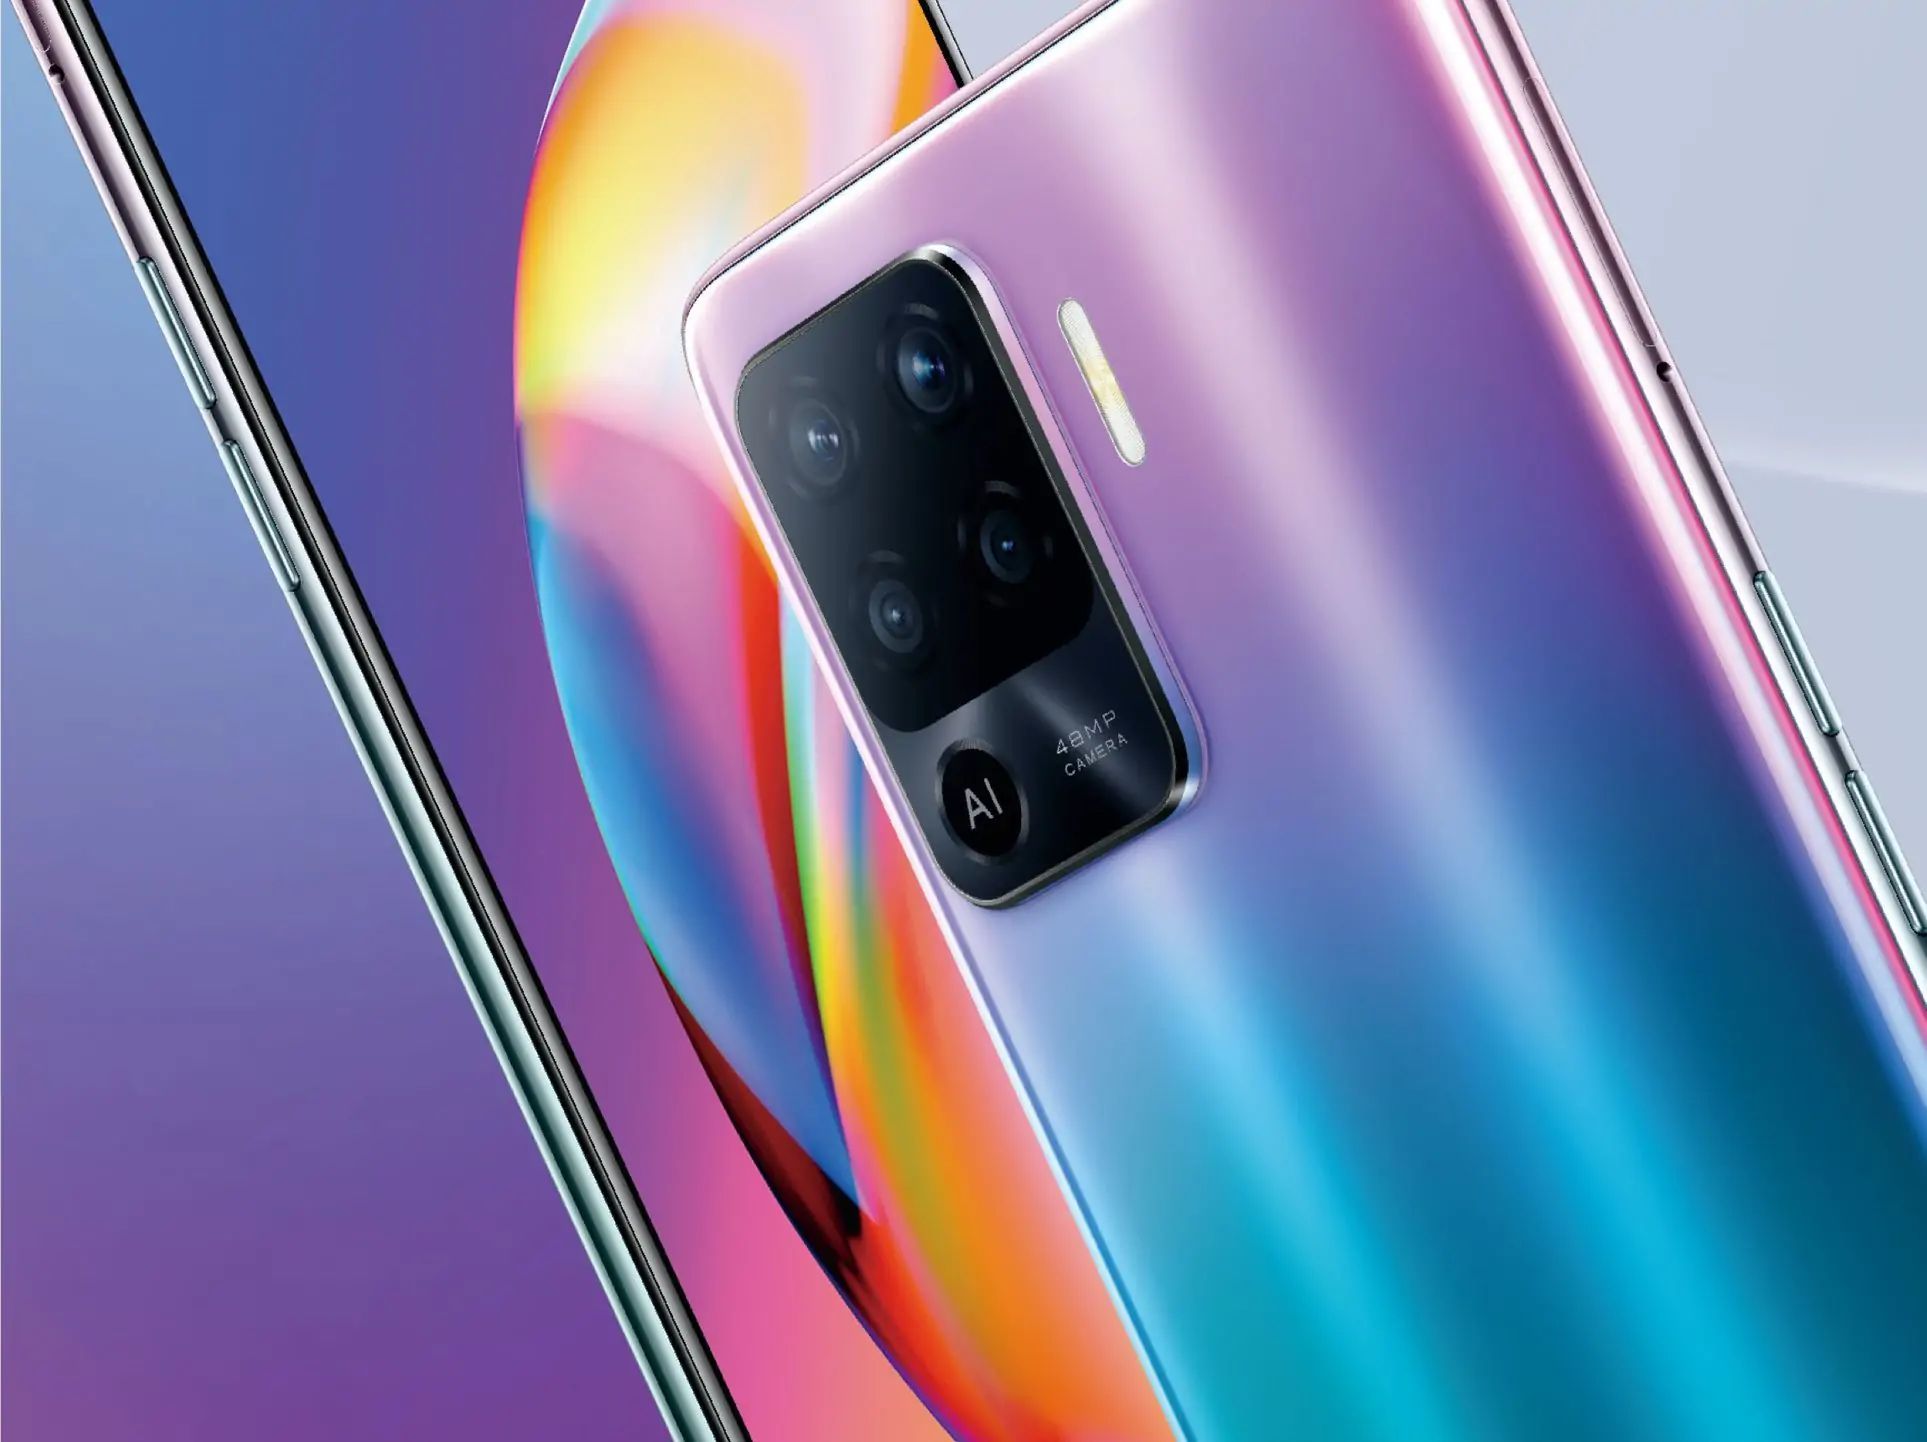 Oppo F19 Pro Price In Pakistan - MobileMall